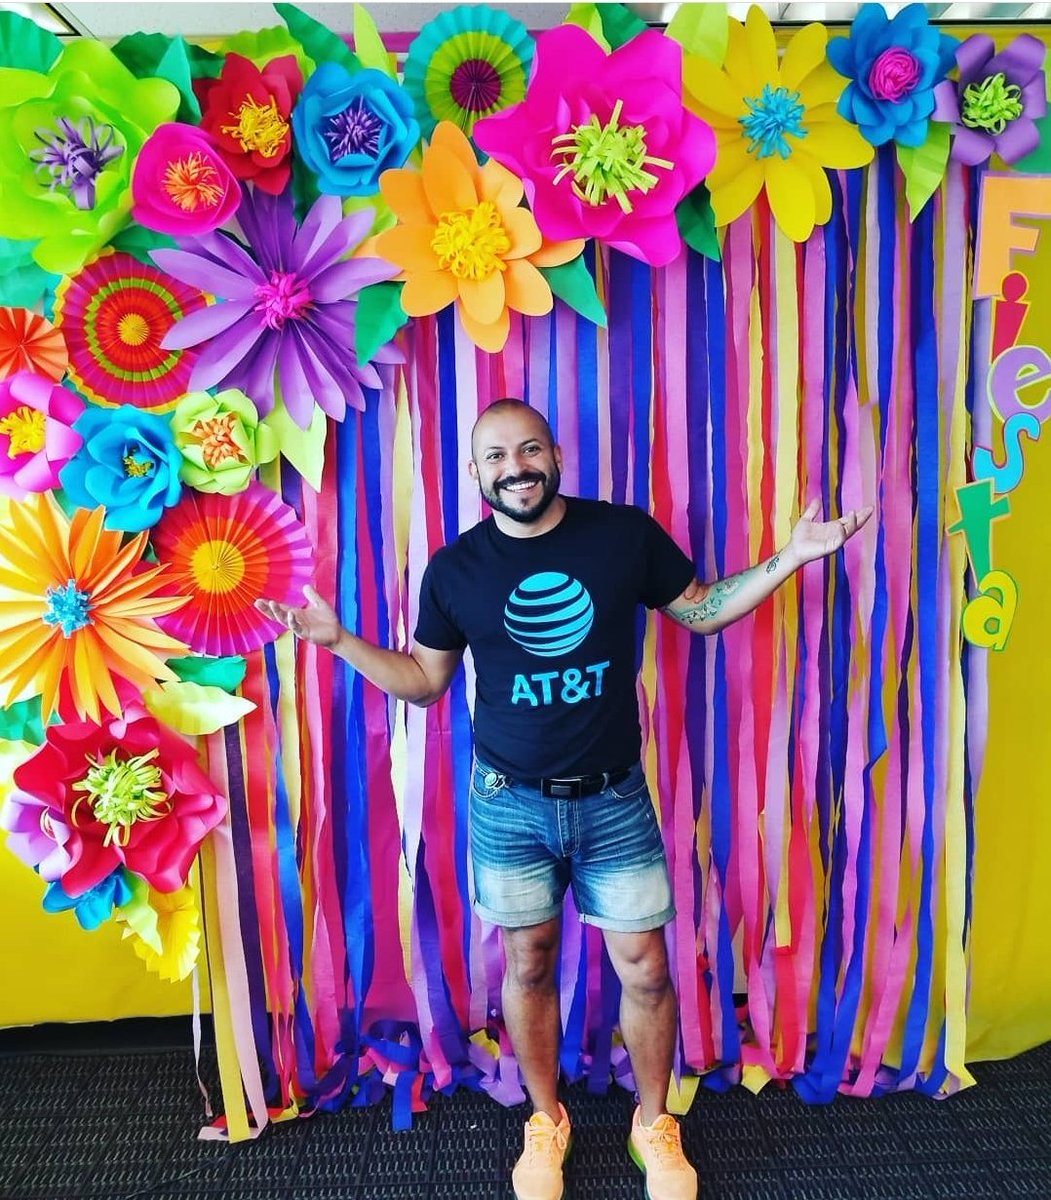 Creativity has always been a part of who I am.  Check out this back drop I did for a work function at @att. All flowers handmade. 
#vivafiesta #Proud2bYoung #1STATENation #creativityday #LifeAtATT